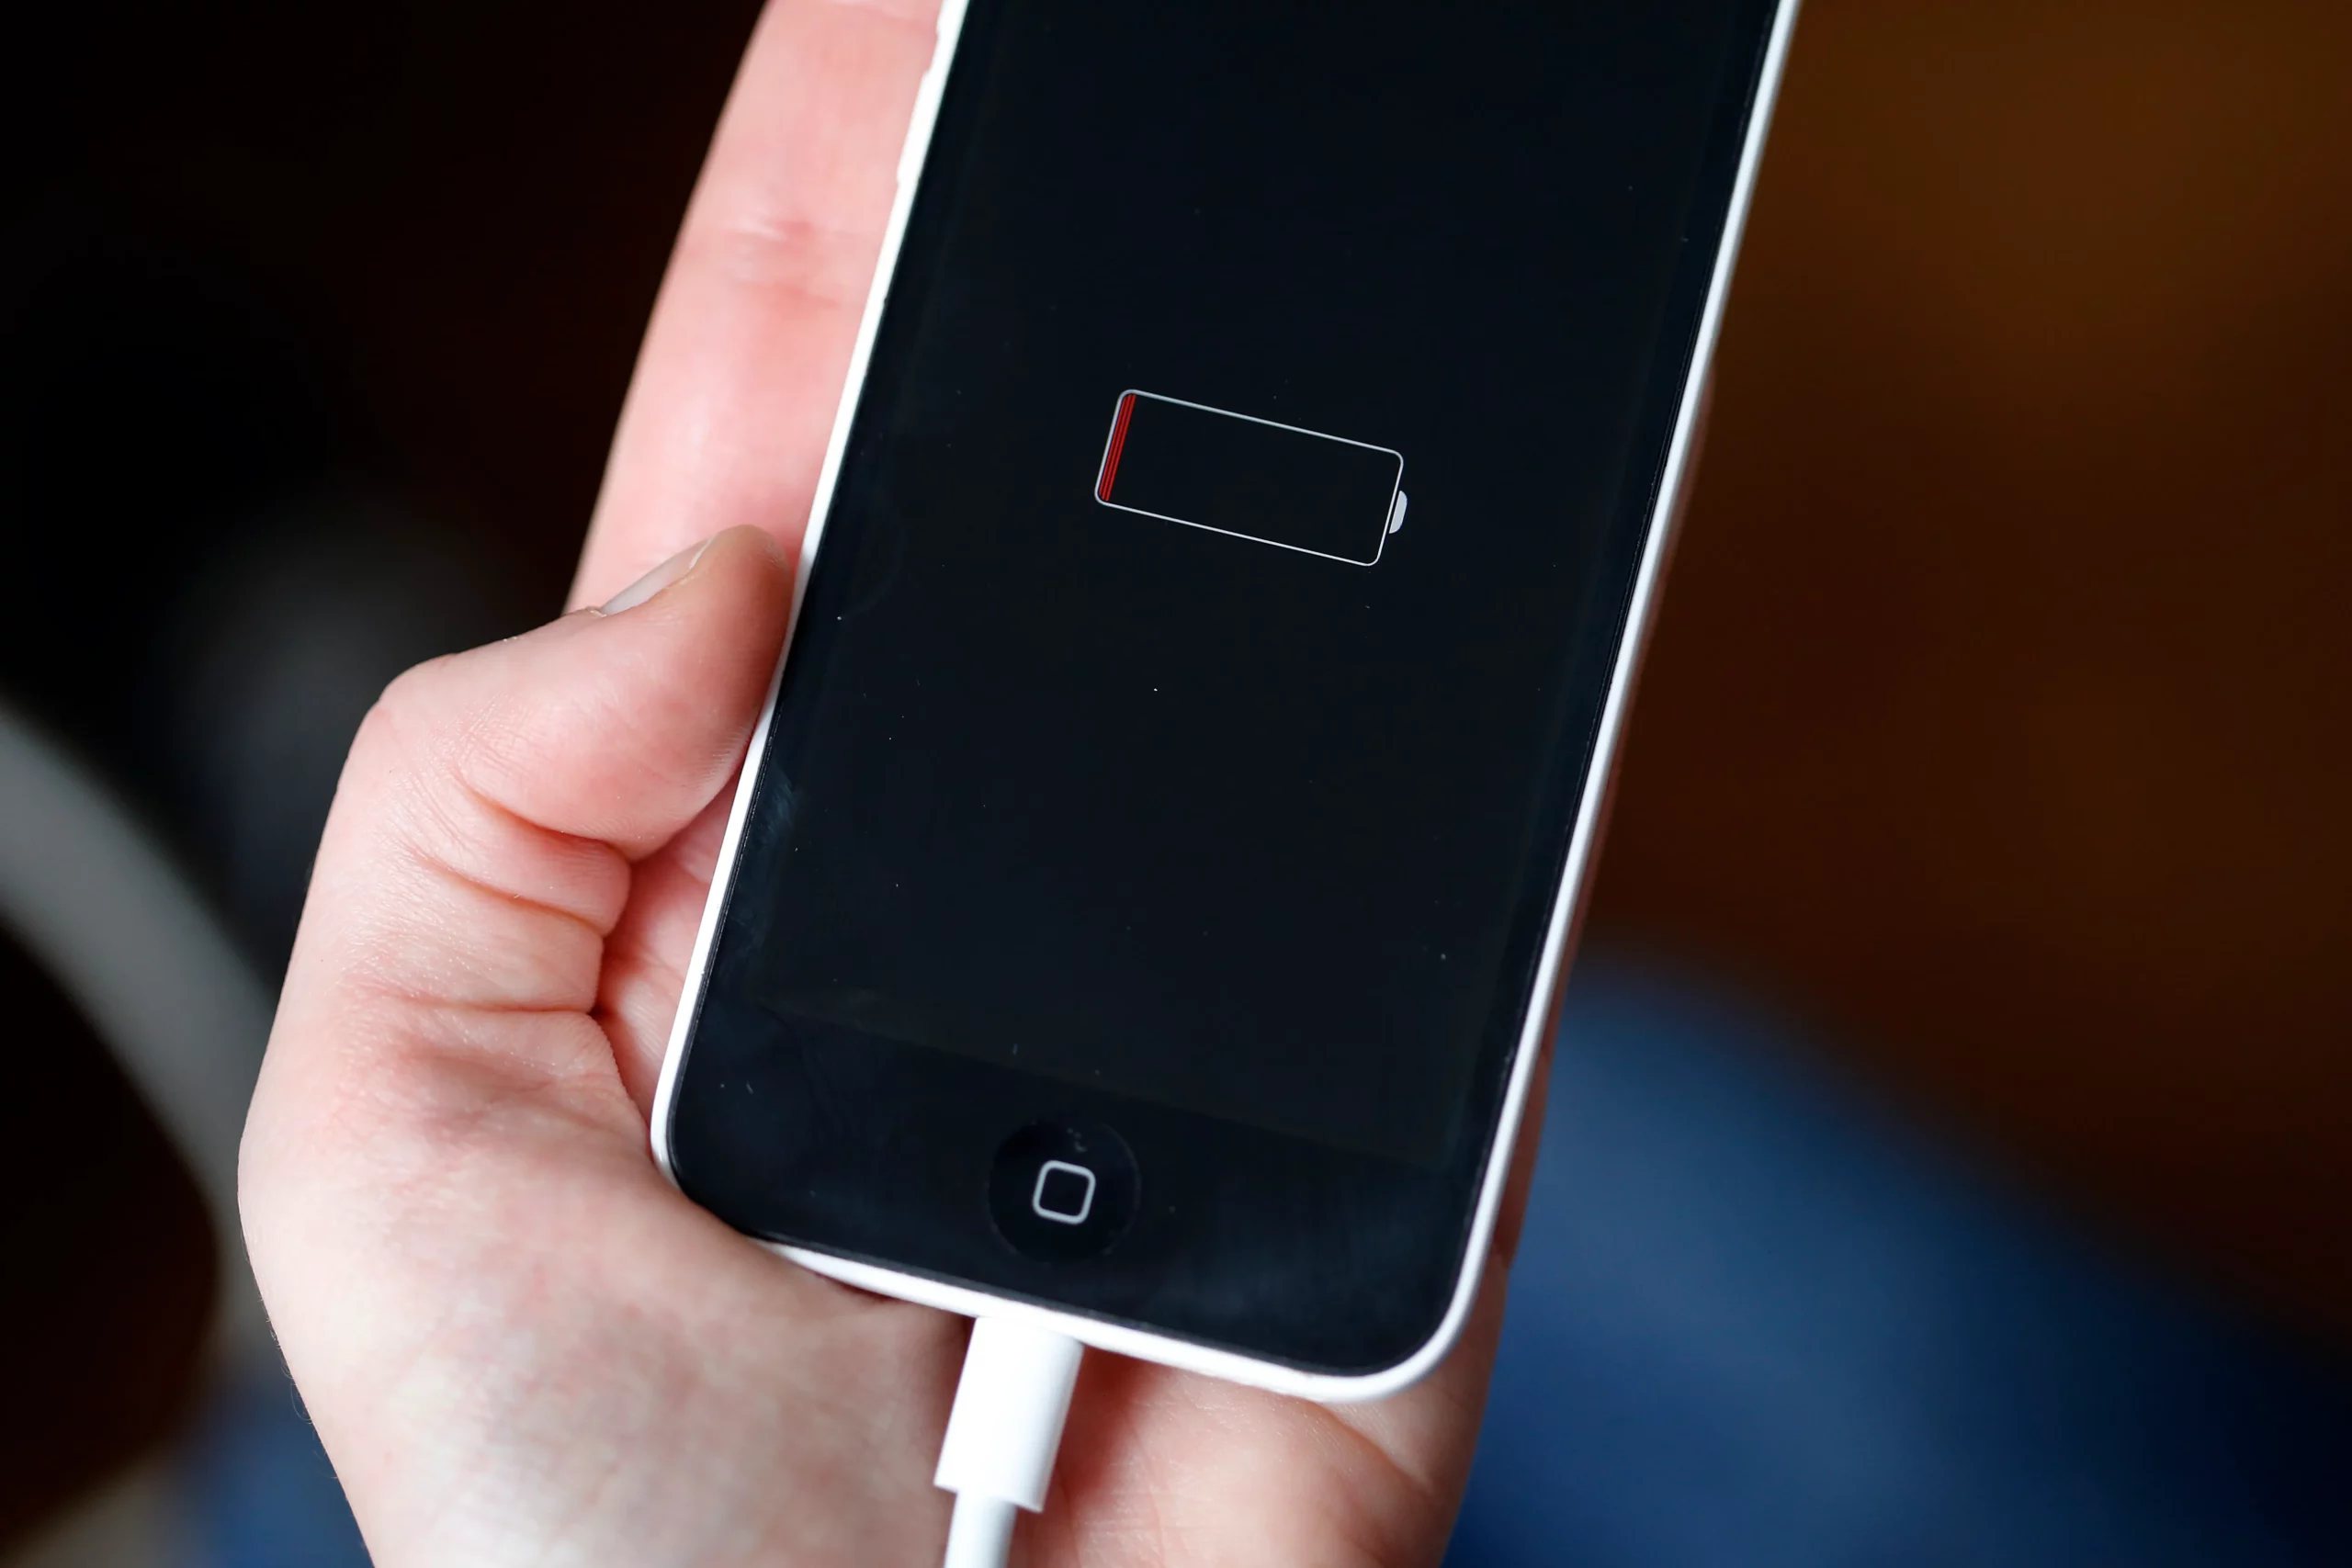 Battery Drain Issues 25 Tips to Extend iPhone Battery Life.